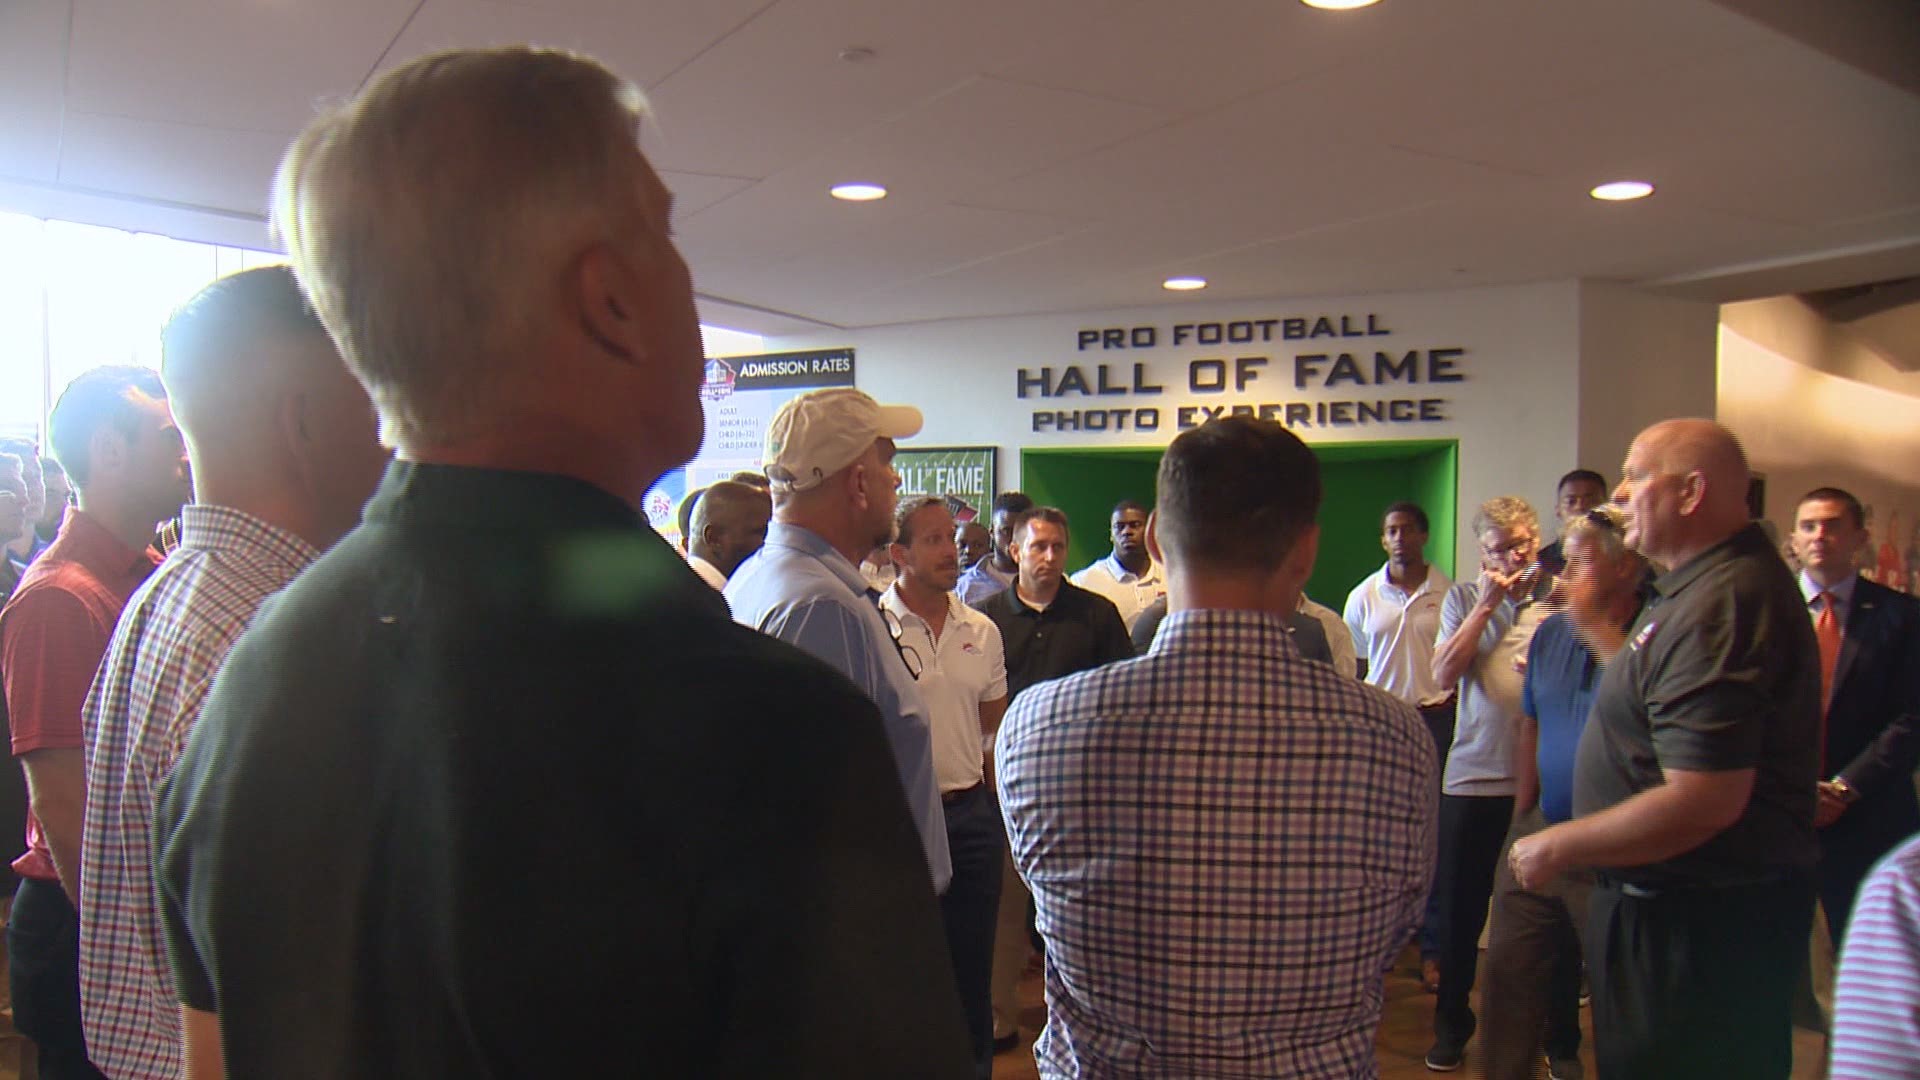 The Denver Broncos visited the Pro Football Hall of Fame in Canton ahead of their first preseason game.